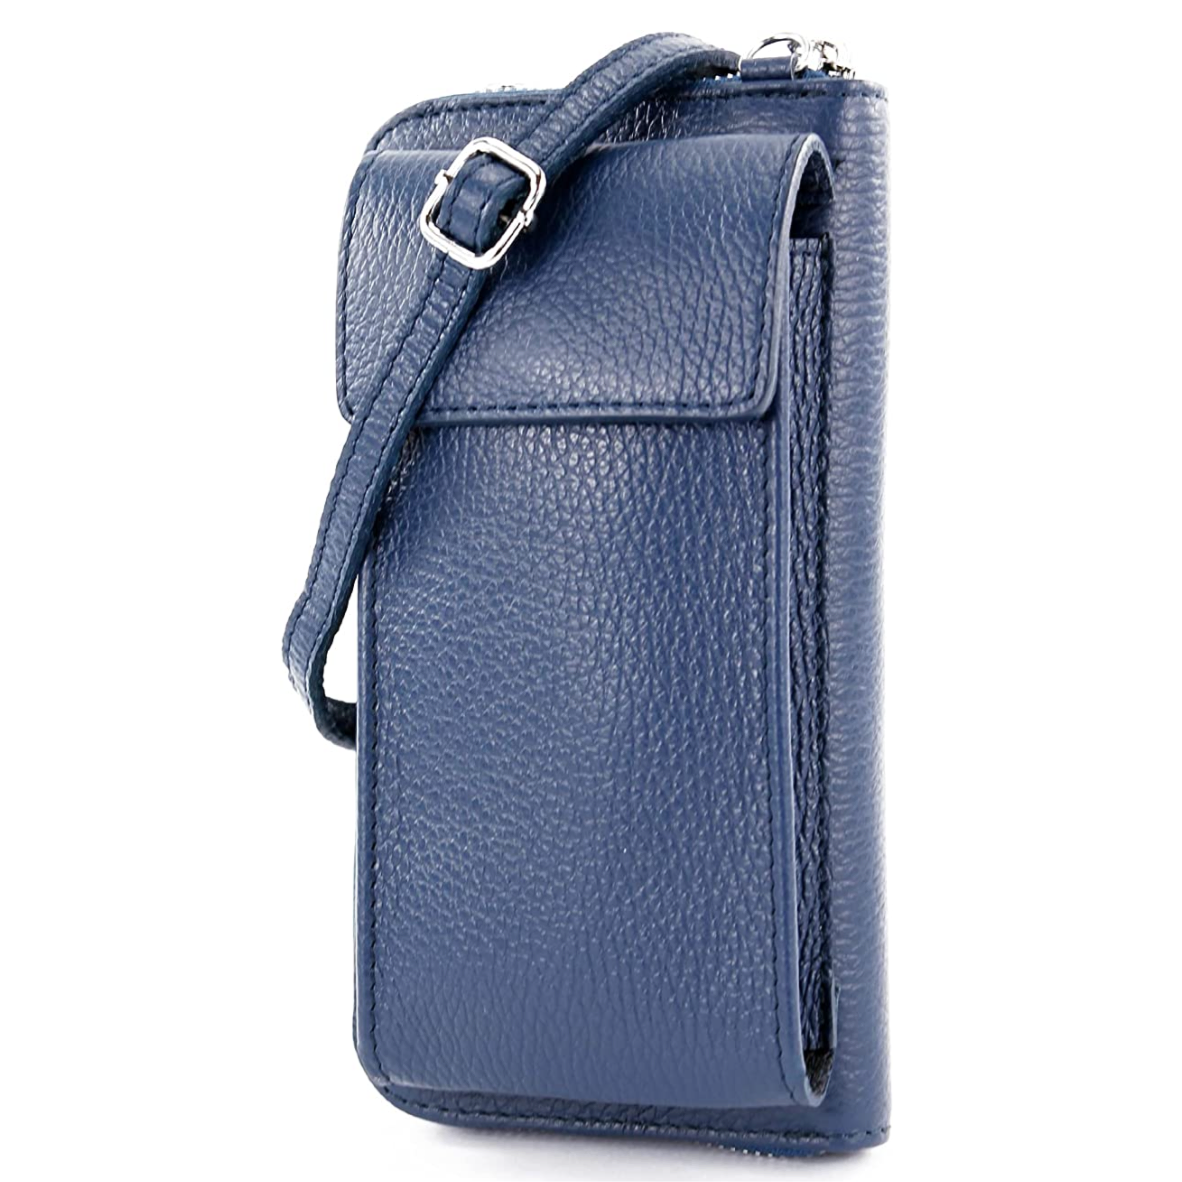 Modarno multifunctional shoulder bag, genuine leather wallet mobile phone bag, suitable for cell phones up to 6.5 inch